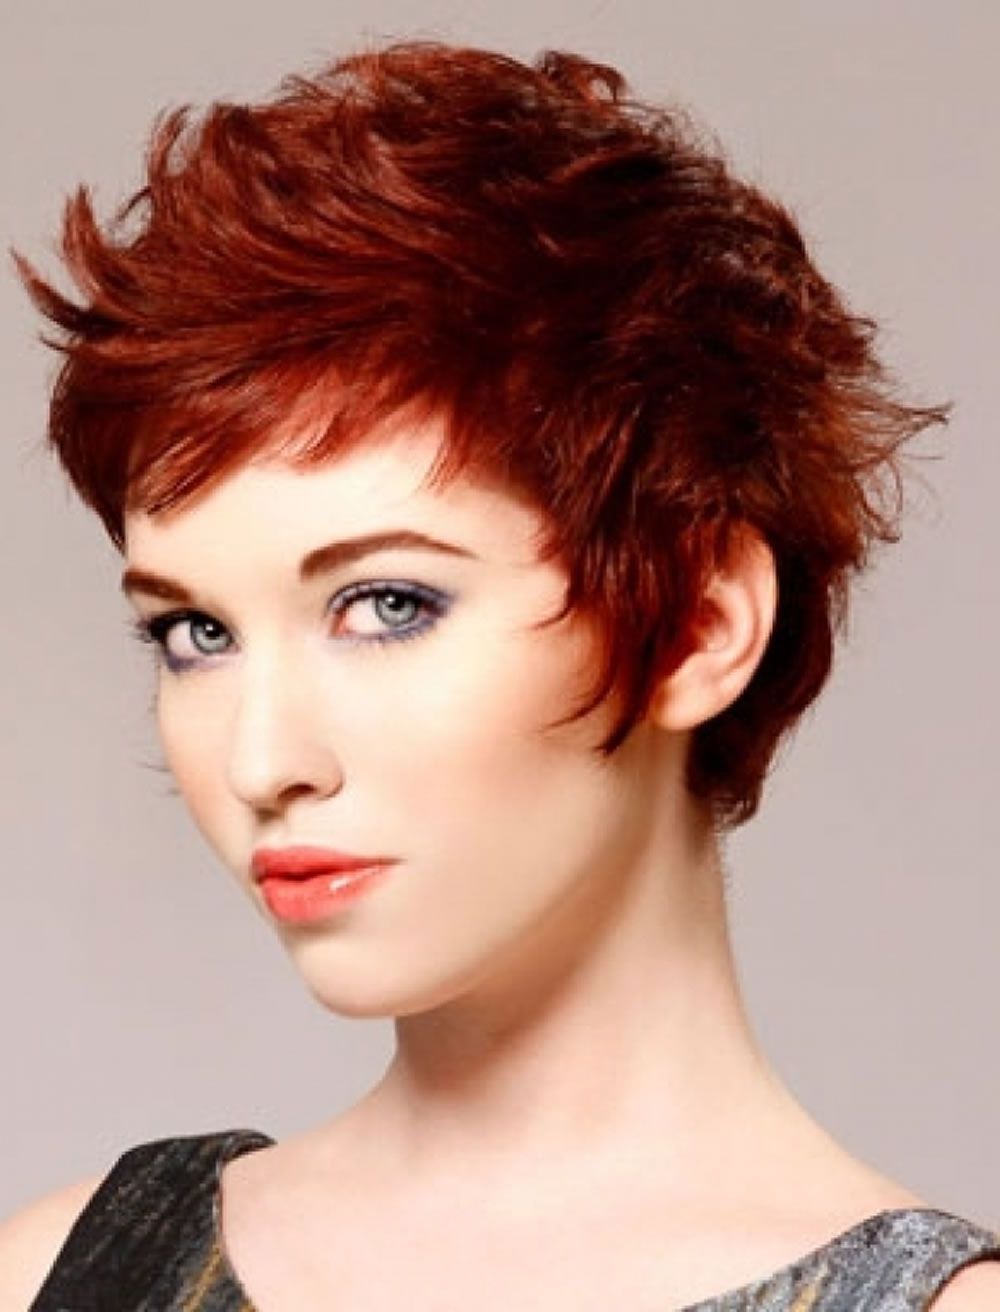 20 Short Haircuts For Red Hair New Design | Matsnilssonmma With Regard To Red Hair Short Haircuts (View 3 of 25)